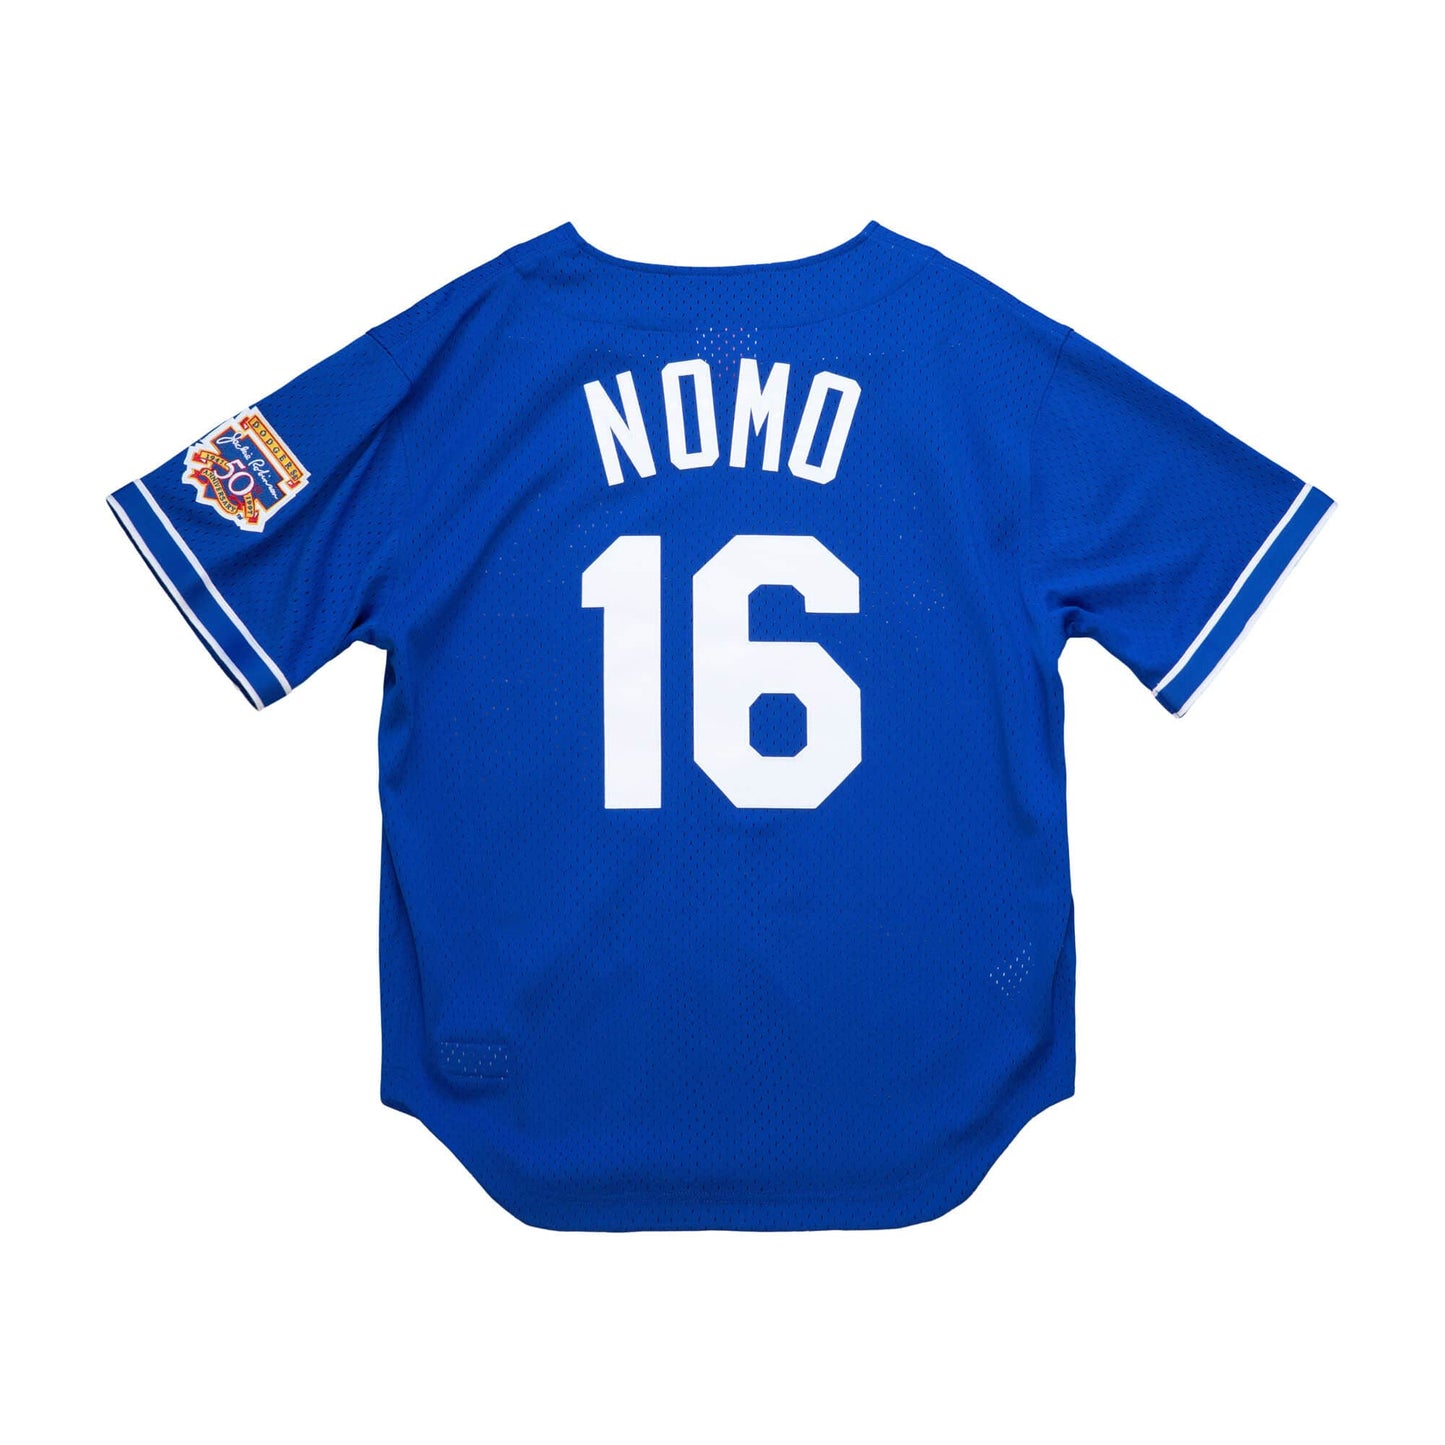 Men's Los Angeles Dodgers Hideo Nomo Mitchell & Ness Royal Cooperstown Collection Mesh Batting Practice Jersey